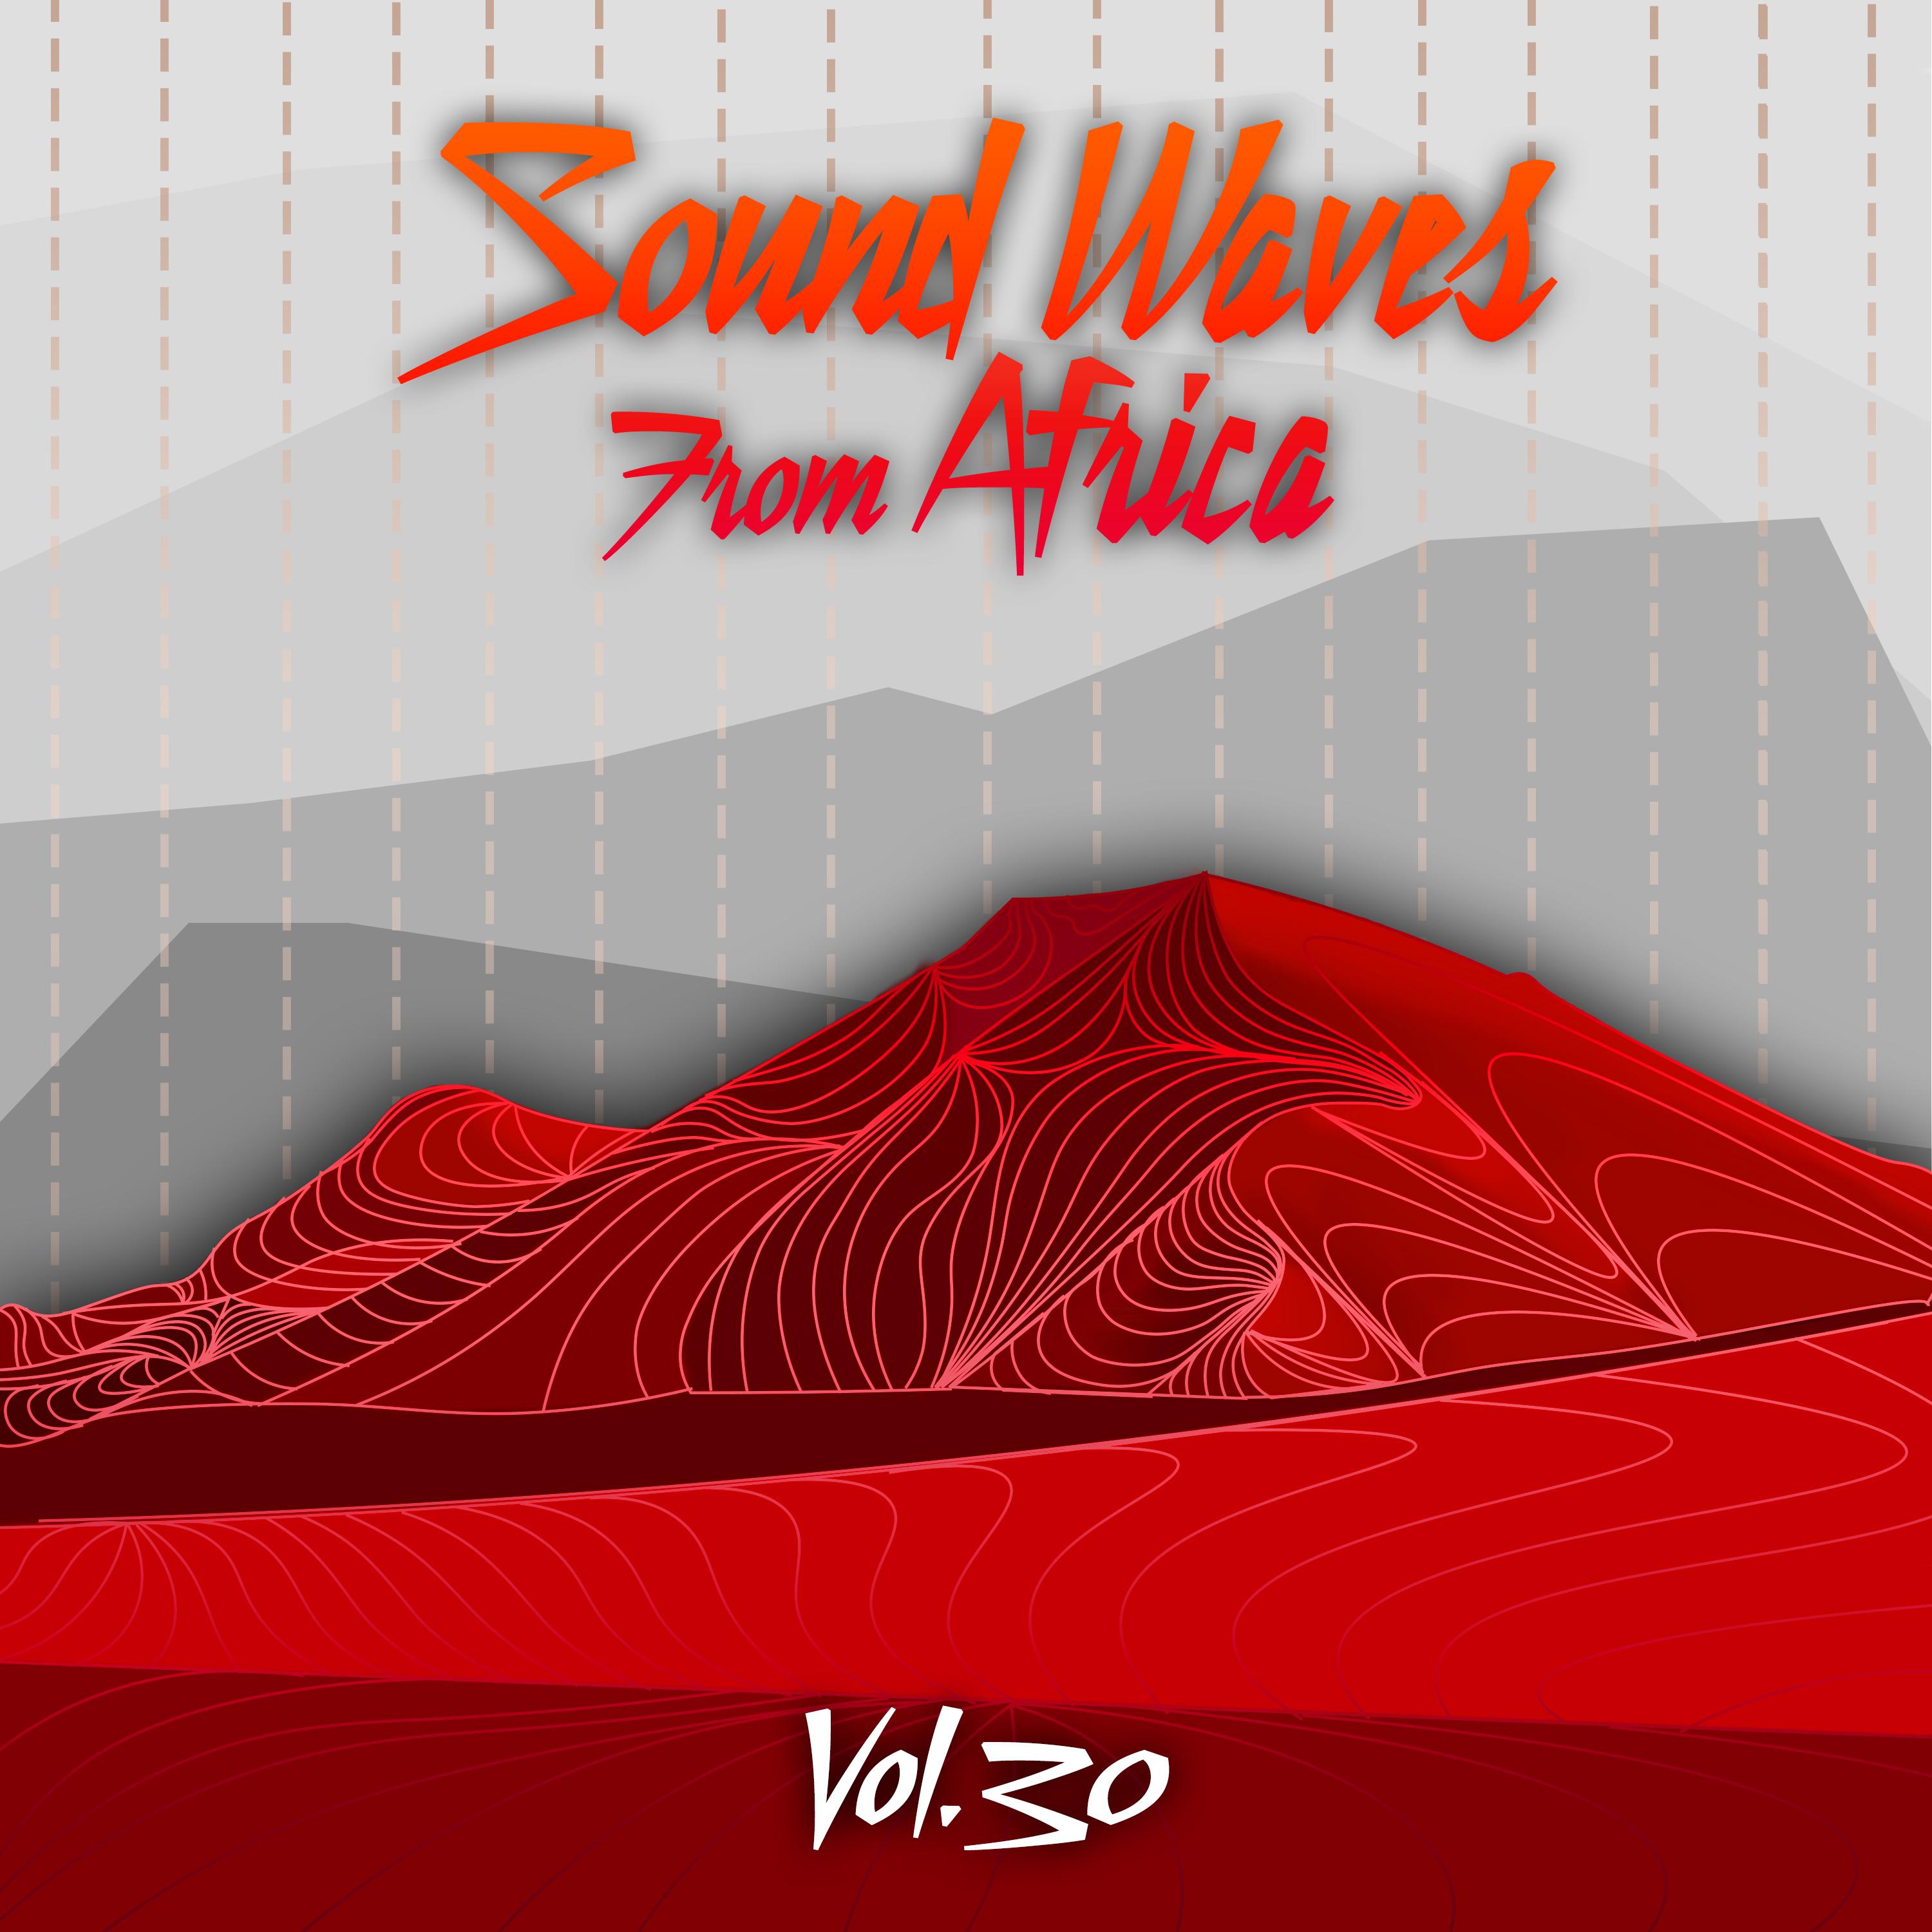 Sound Waves From Africa Vol, 30